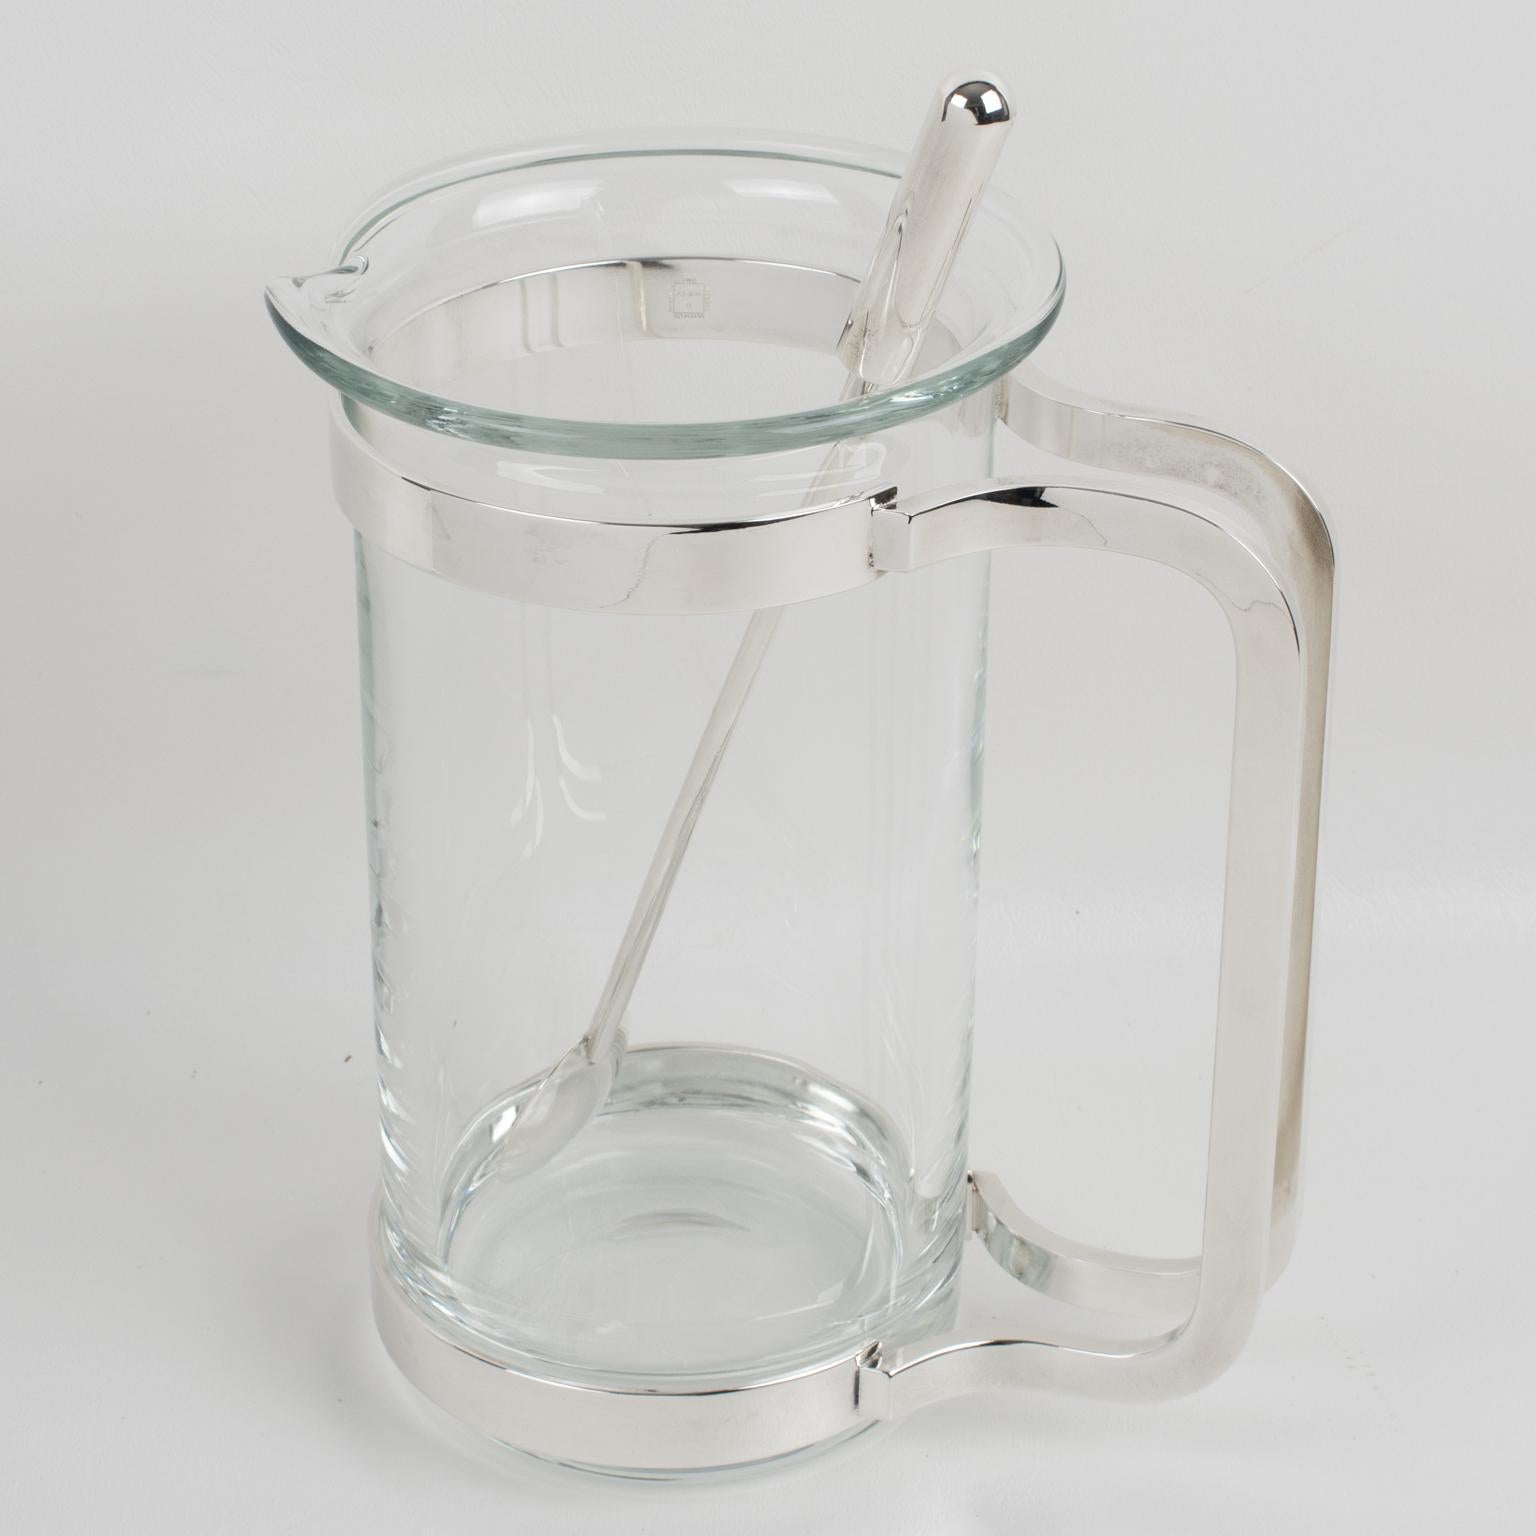 Gorham designed this streamlined barware set for its Maestri Collection circa 1997. The sleek and modernist design features a tall glass and silver plate Martini pitcher or mixer jug and a long stirrer spoon. The glass carafe with a lip for pouring